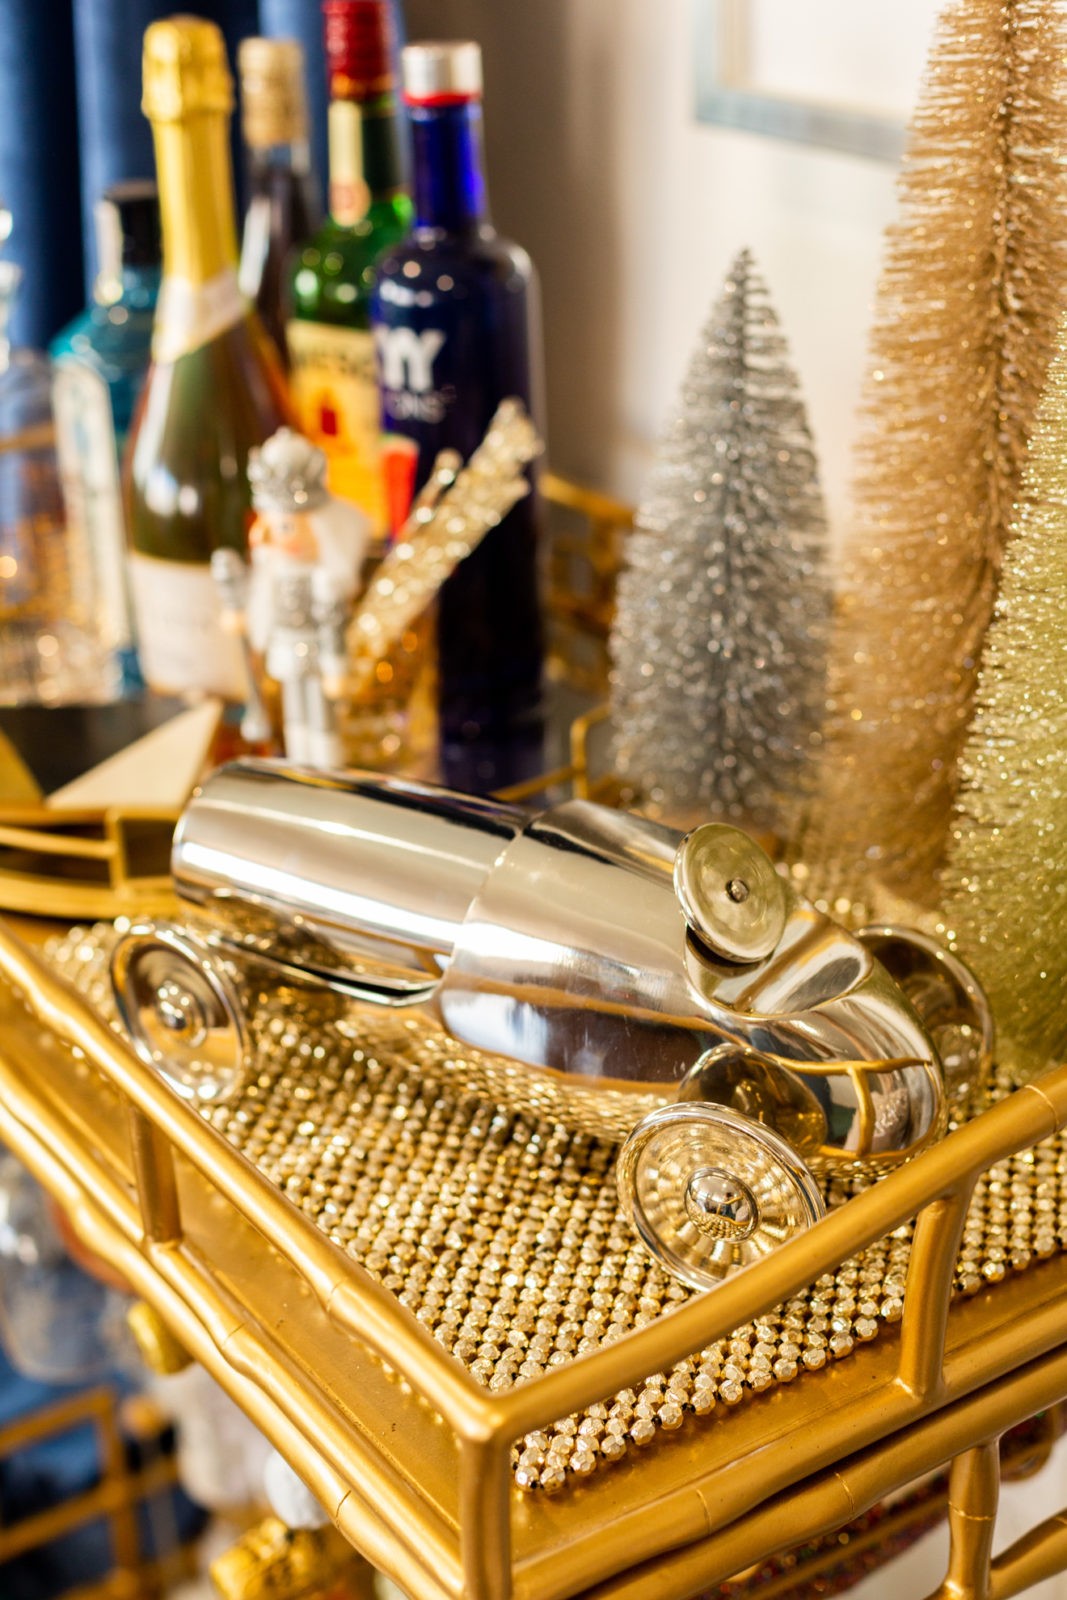 Extra Special Holiday Gifts from Bed Bath and Beyond by Lifestyle Blogger Laura Lily, GODINGER RACE CAR COCKTAIL SHAKER IN STAINLESS STEEL | Extra Special Holiday Gifts from Bed Bath and Beyond by popular Los Angeles life and style blogger, Laura Lily: image of a Bed Bath and Beyond race car cocktail shaker. 